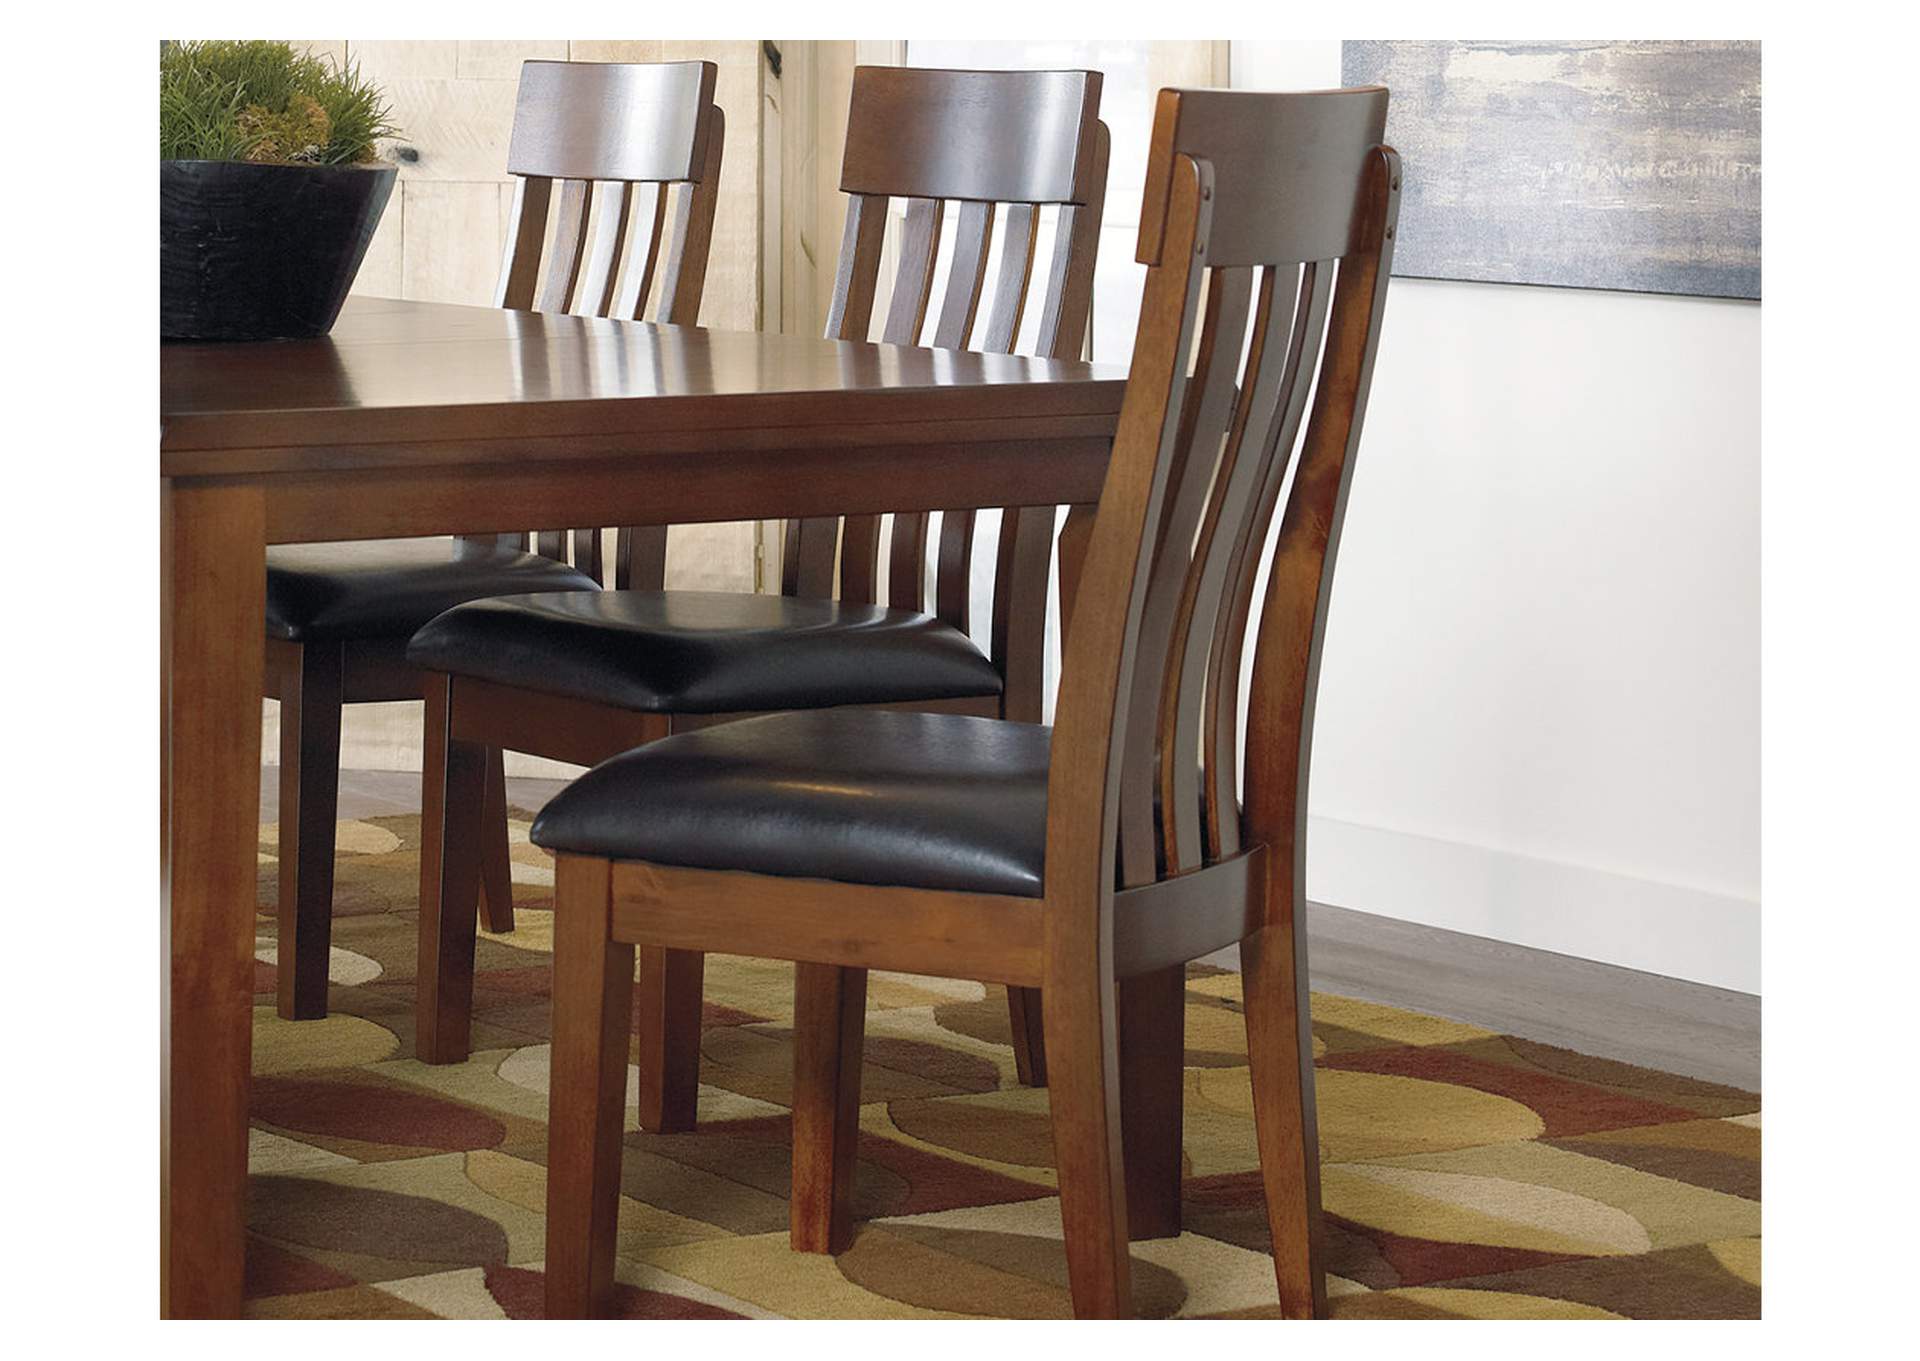 Ralene Dining Table and 6 Chairs and Bench,Signature Design By Ashley